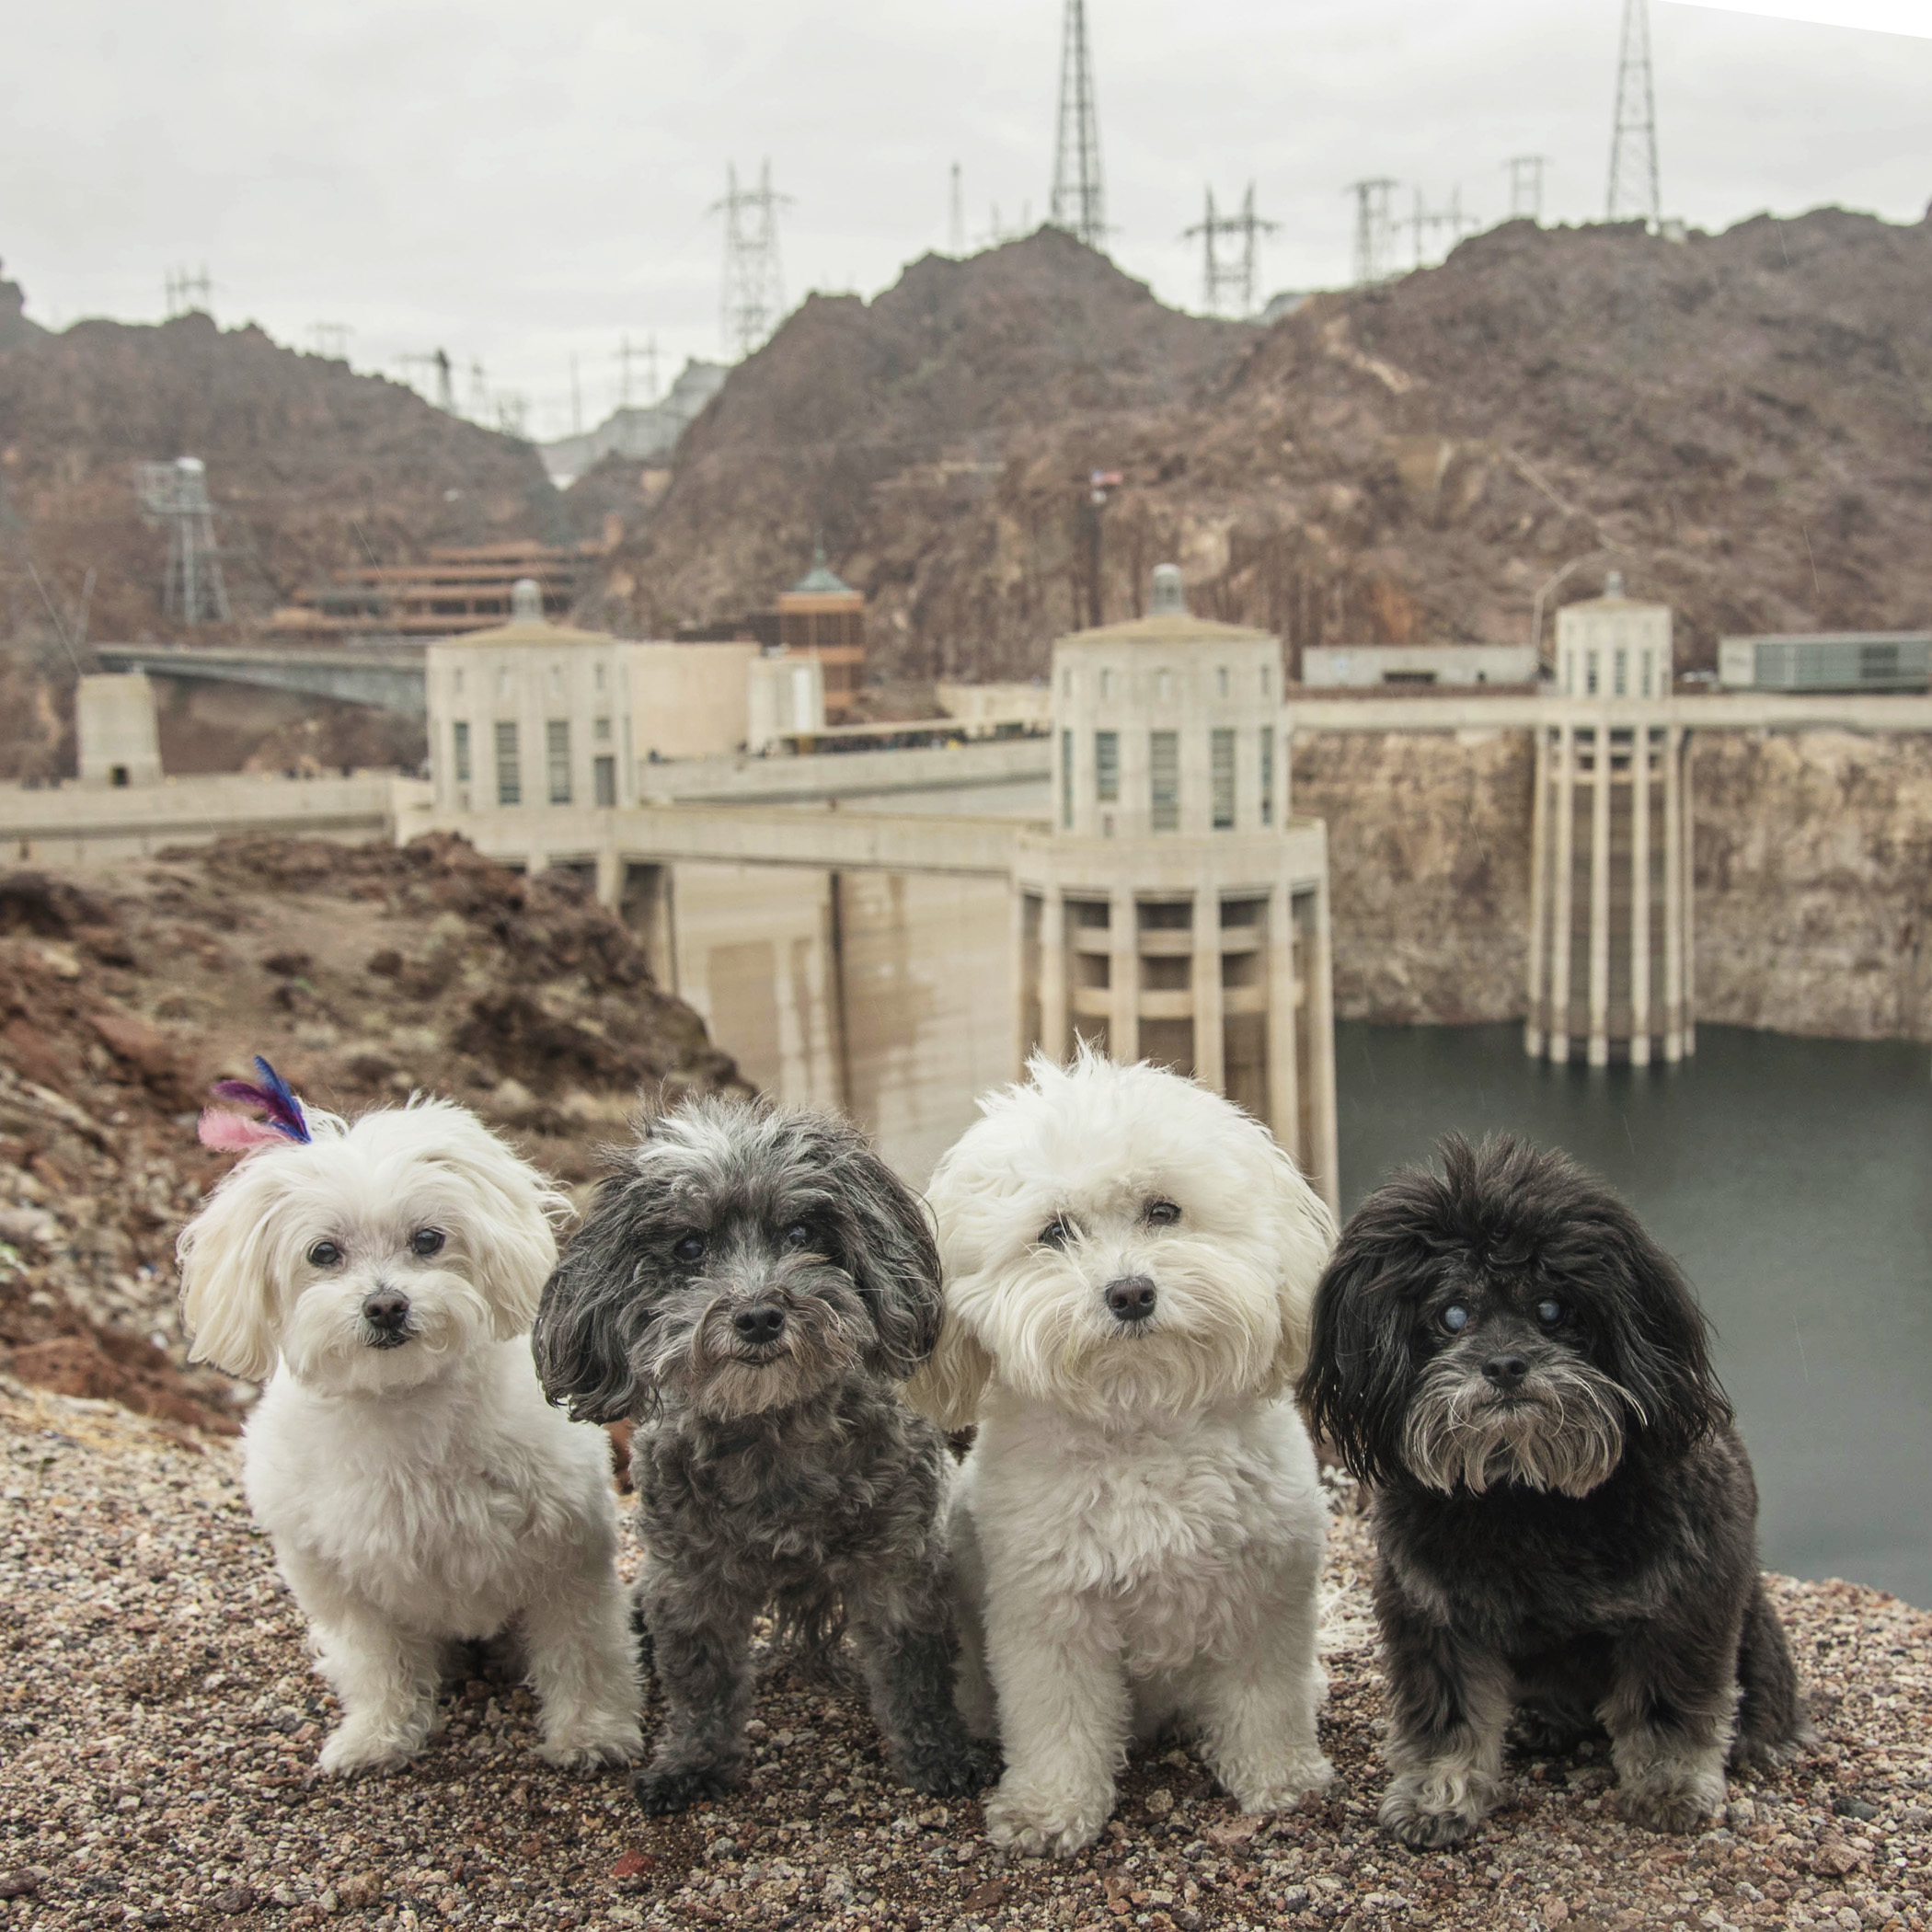  Our Daddy is a bit of a geek, so he drug us all the way to this Hoover Dam thing. We don’t get it, but we do love our Daddy, so if it makes him happy, then we’re in! 